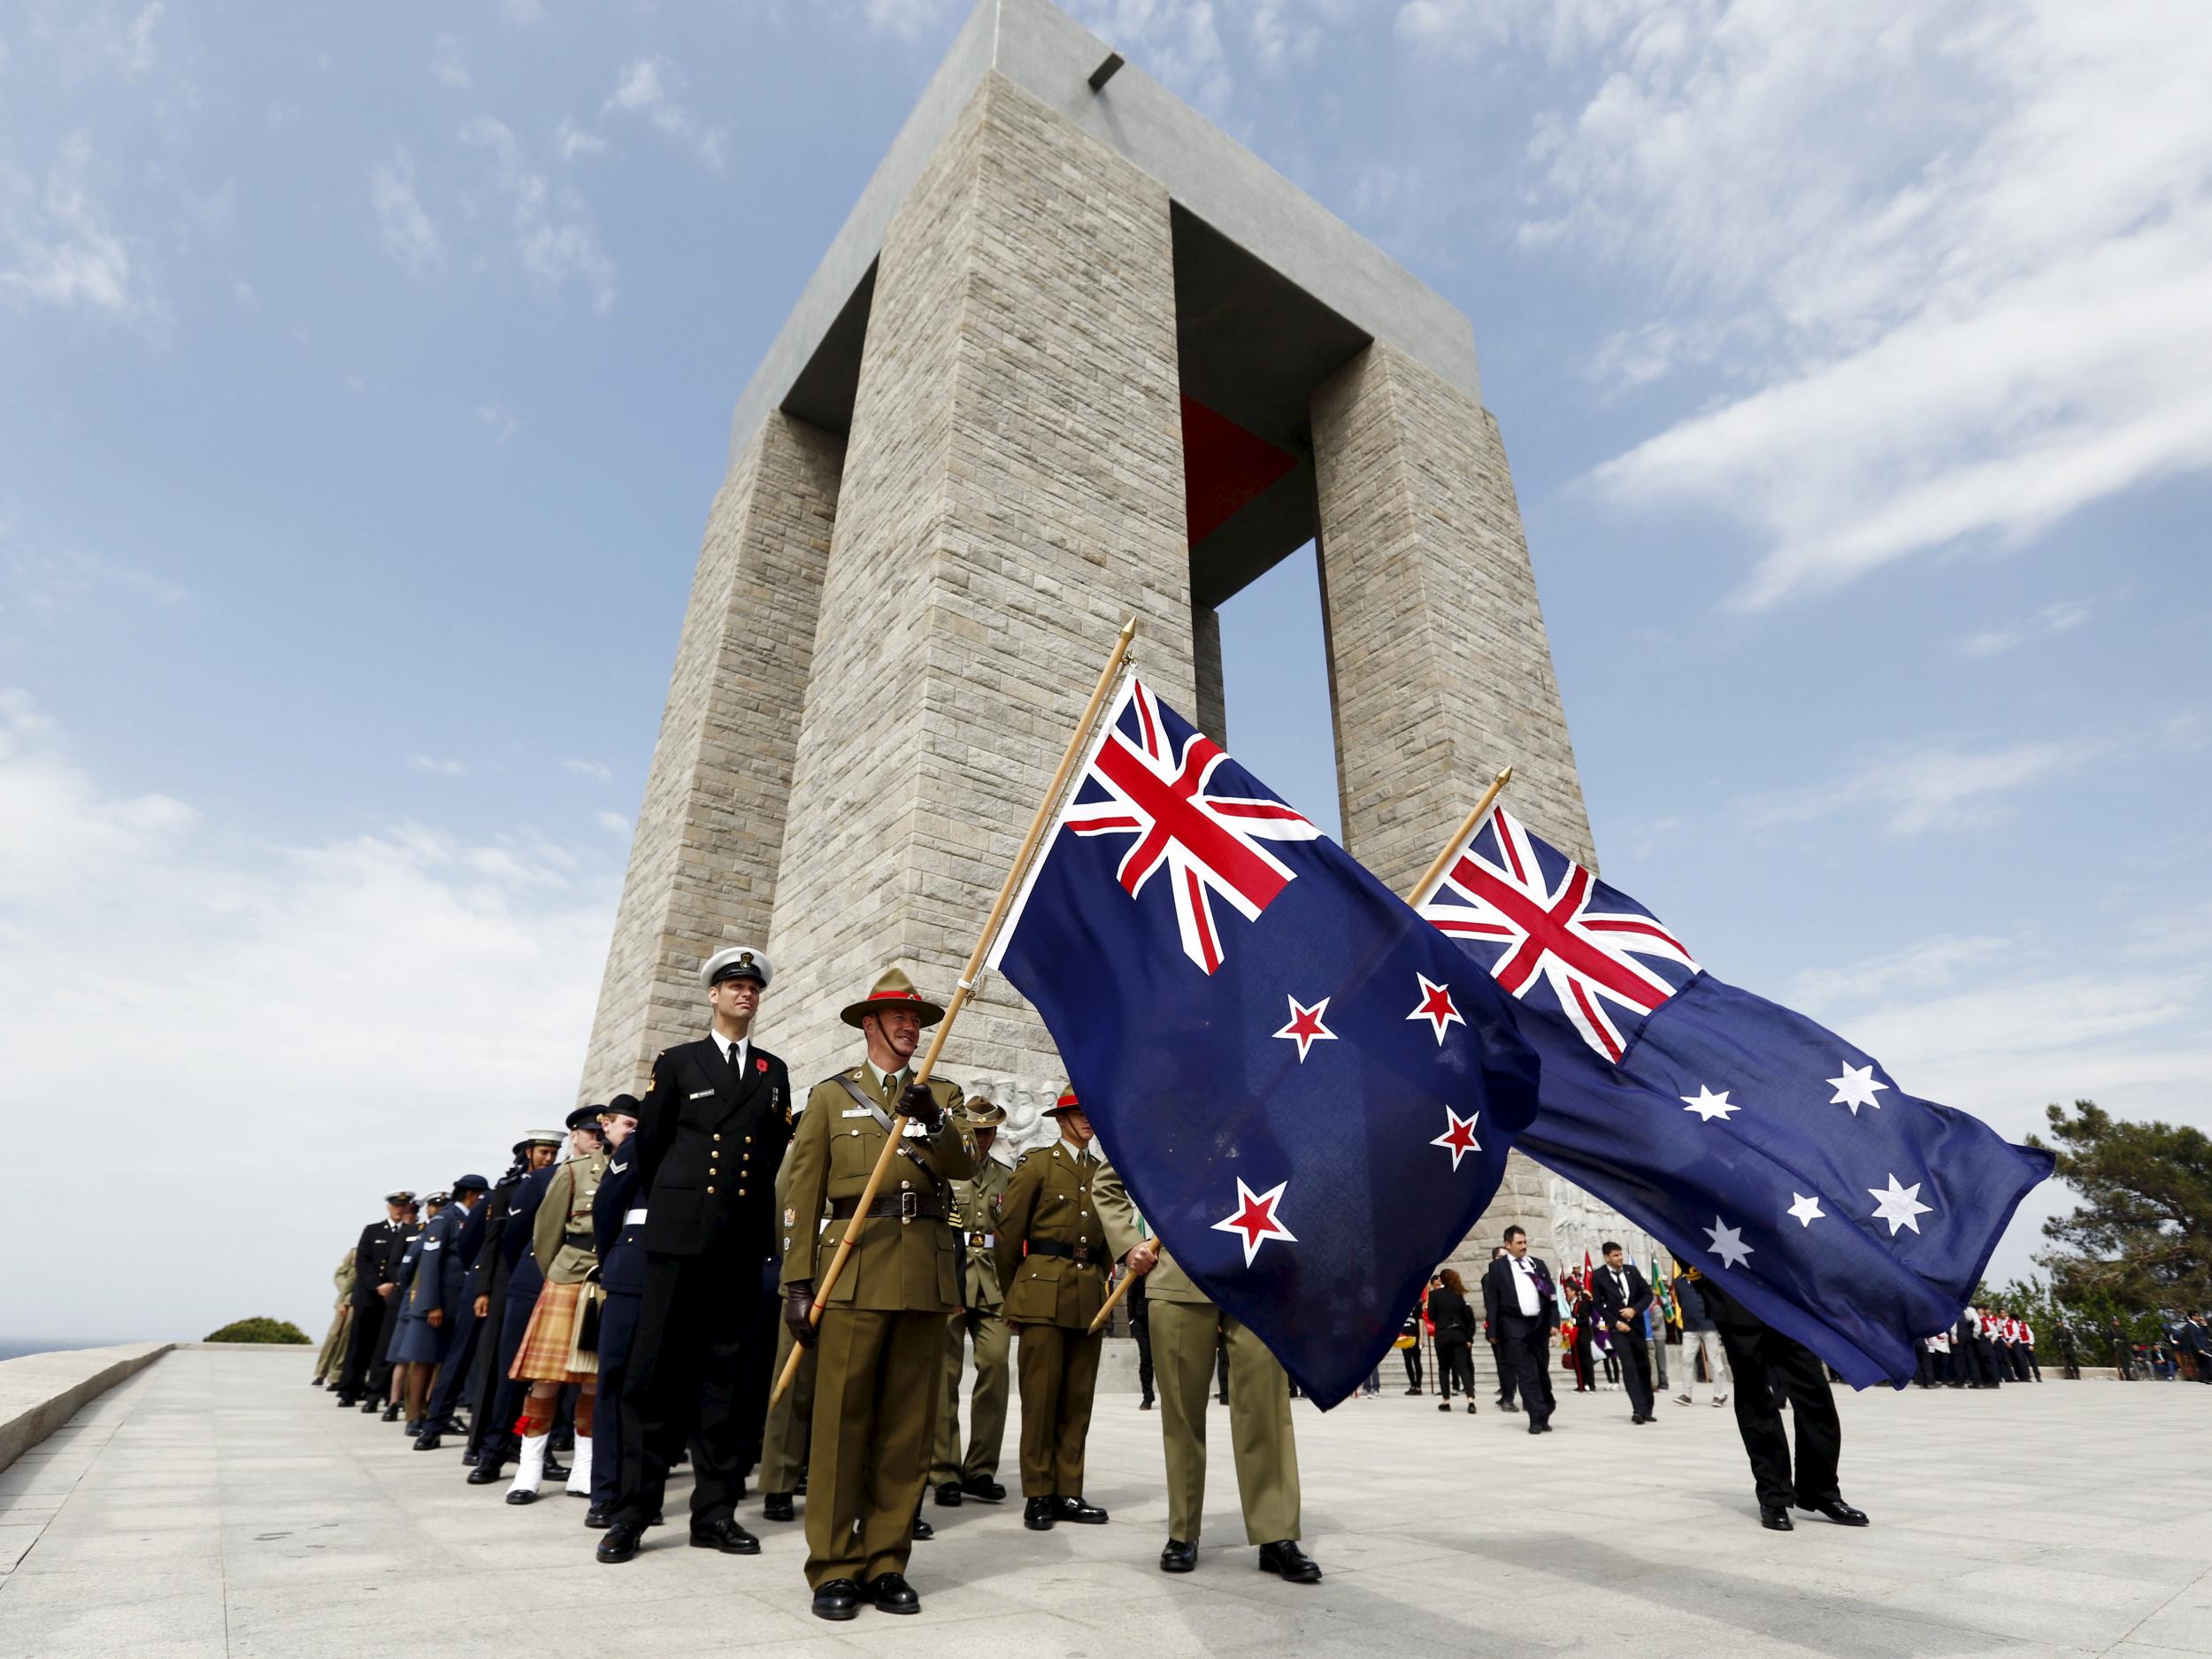 What is Anzac Day and how is it marked in Australia and New Zealand?